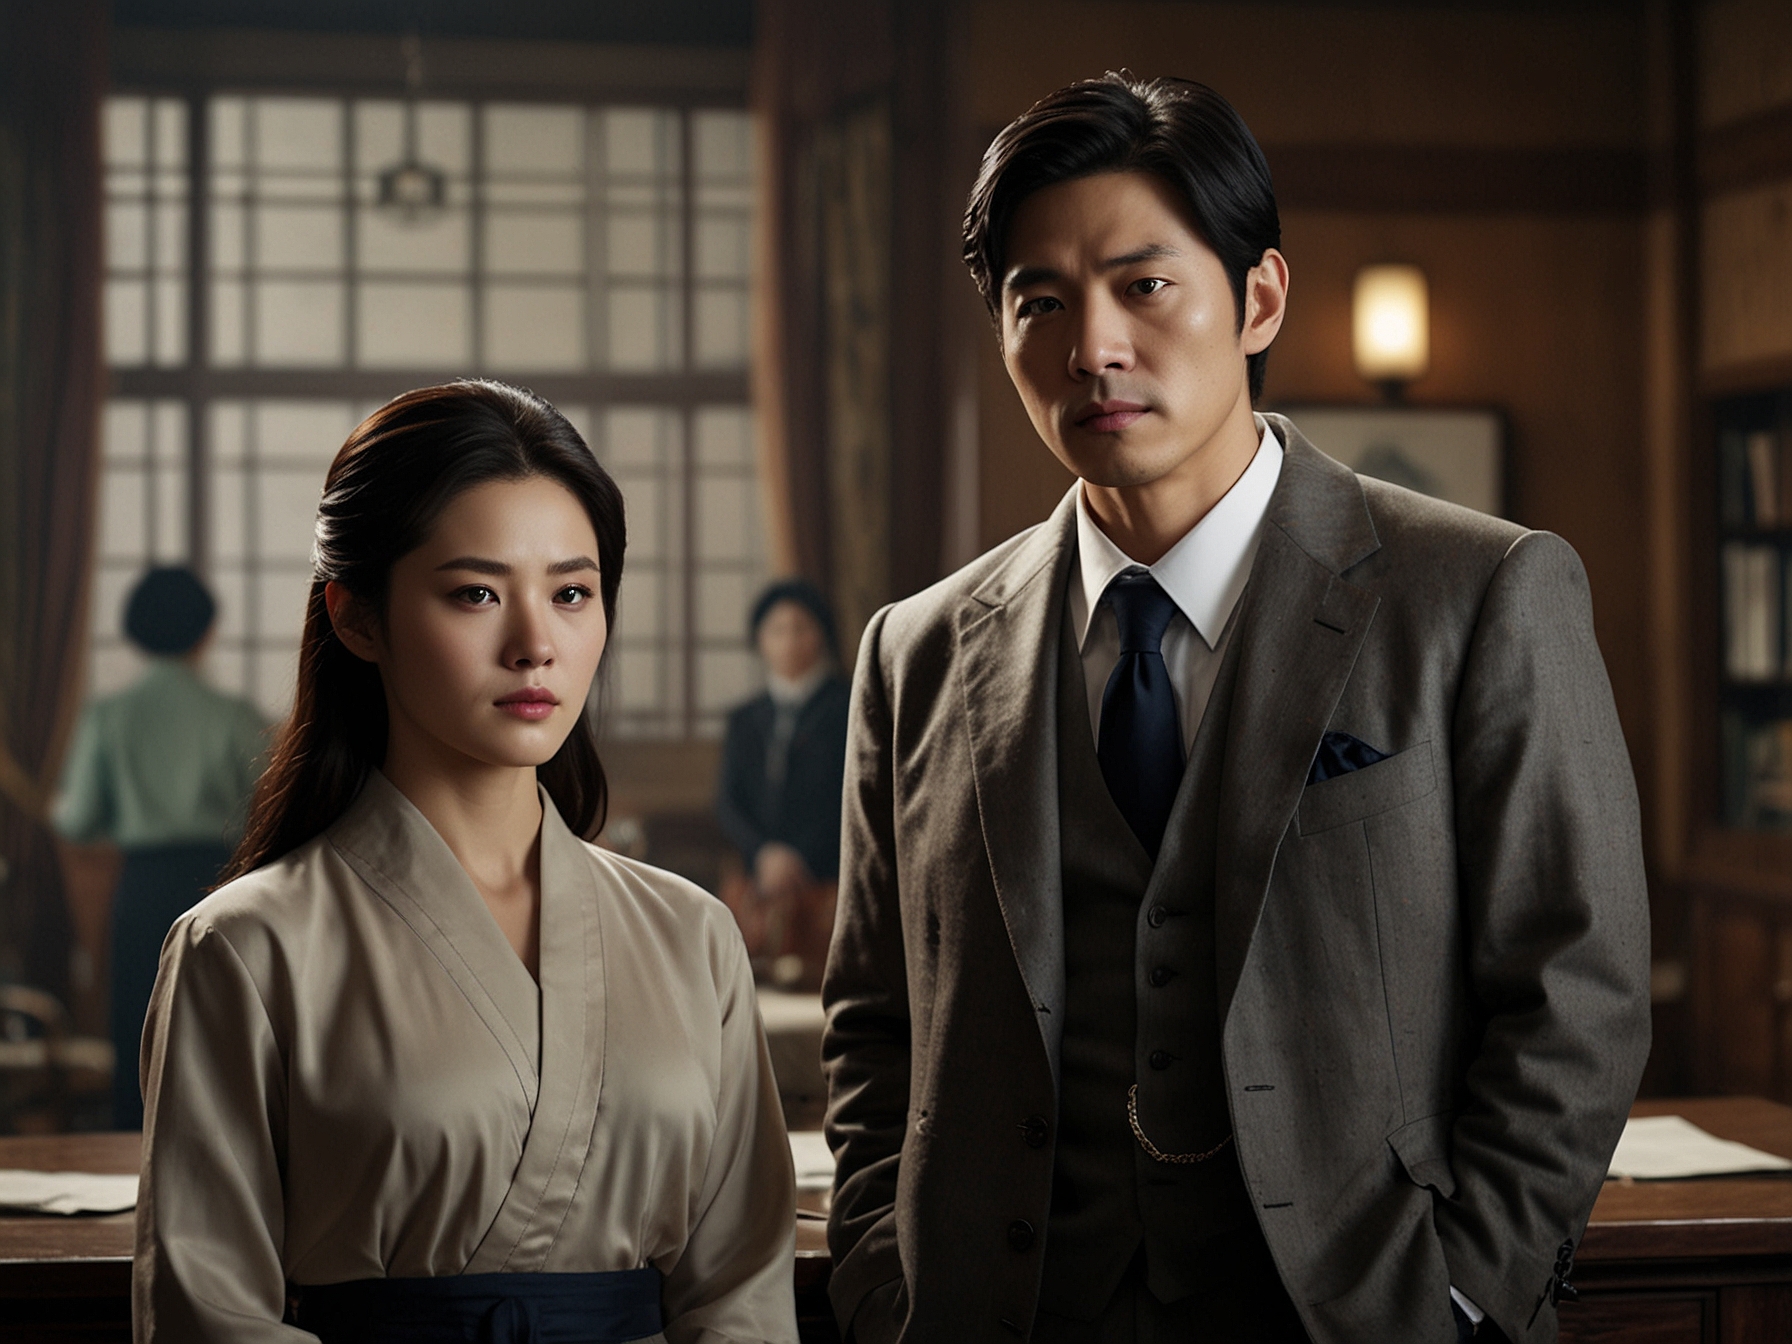 The first still shows Kim Ha Neul as Oh Wan Soo, standing in an opulent room, locking eyes with Seo Yi Sook's character. Their steely gazes reveal a mixture of defiance, determination, and underlying tension.